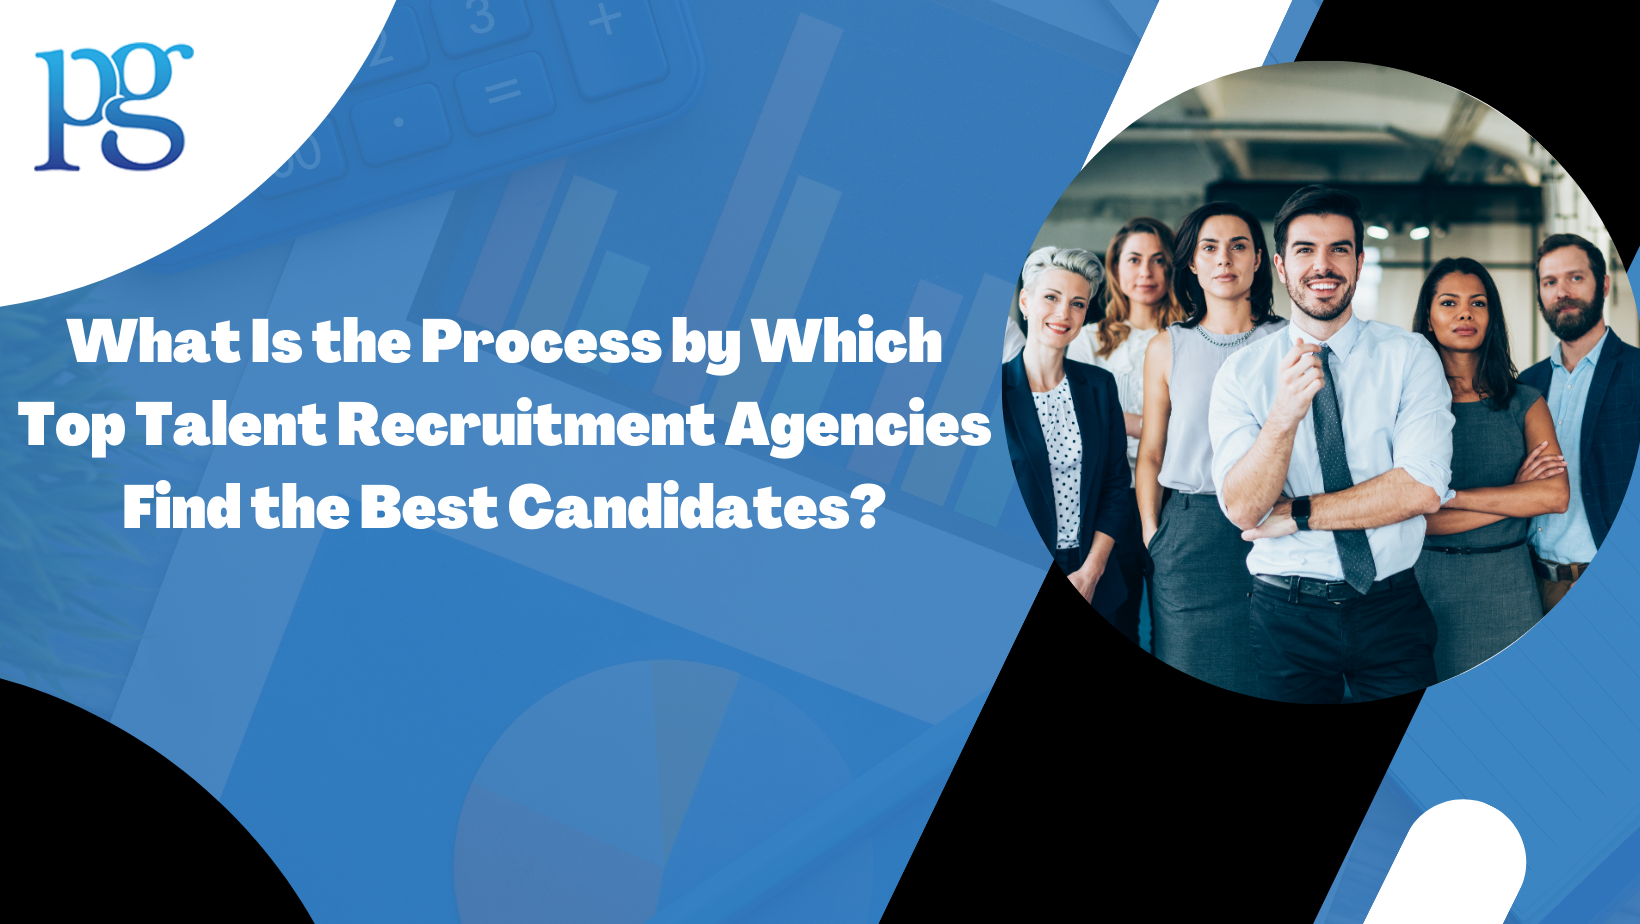 What Is the Process by Which Top Talent Recruitment Agencies Find the Best Candidates?